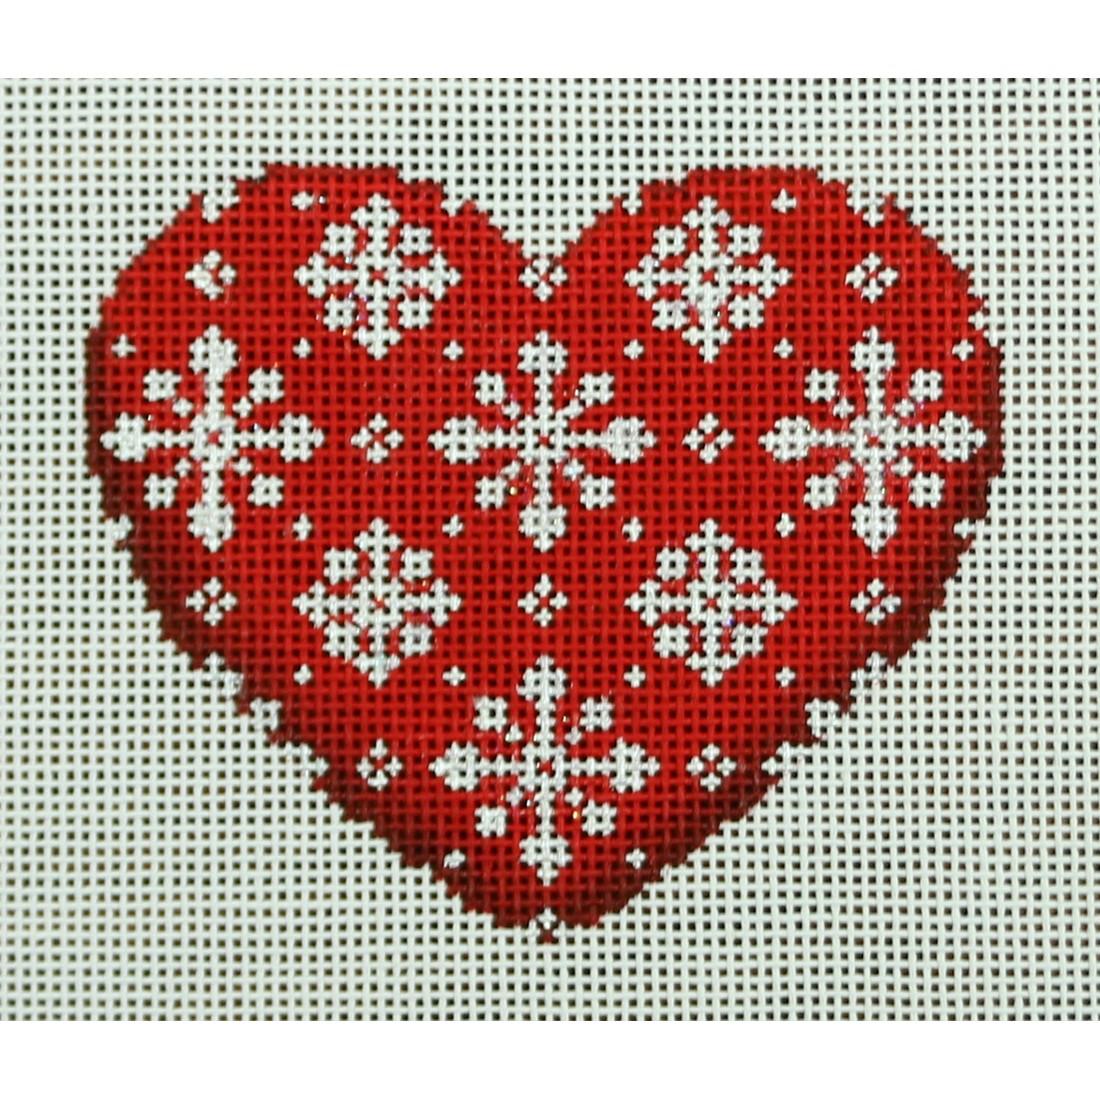 BDS-SQ098 Silver Snowflake Sequins – Pocket Full of Stitches